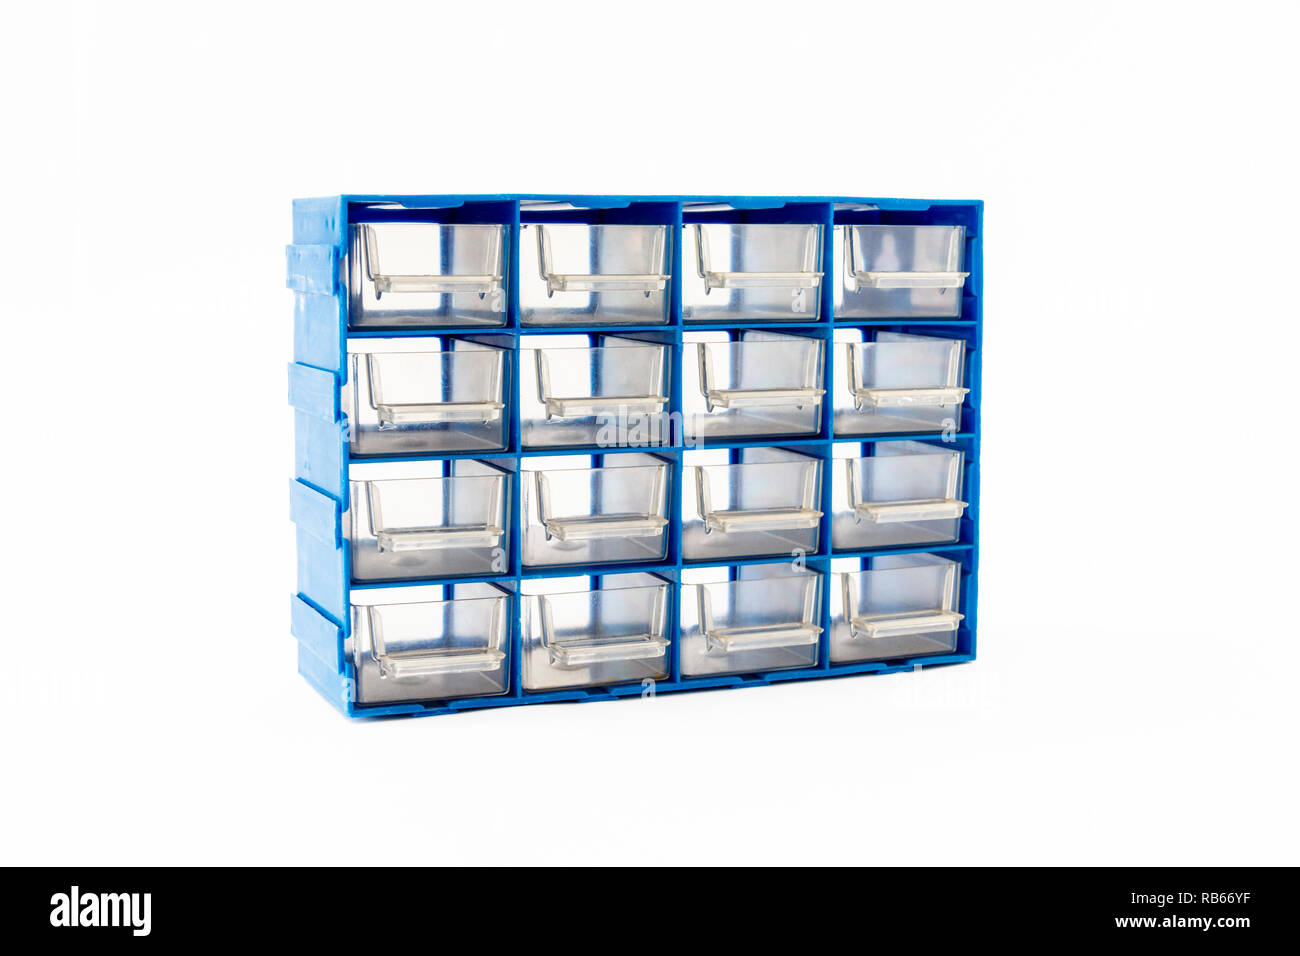 A 16-drawer blue plastic storage cabinet with transparent drawers isolated against a white background Stock Photo